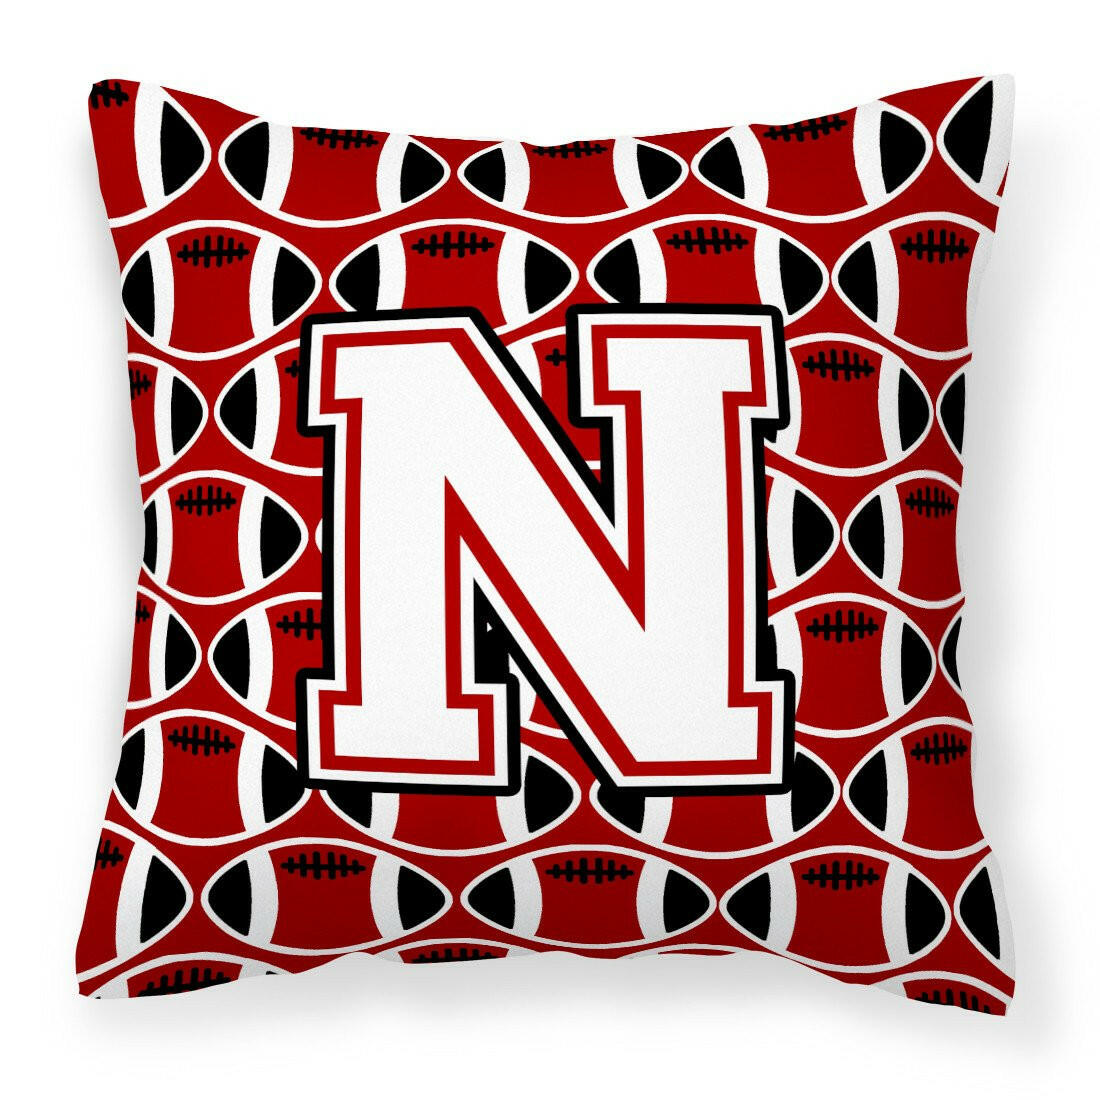 Letter N Football Cardinal and White Fabric Decorative Pillow CJ1082-NPW1414 by Caroline's Treasures